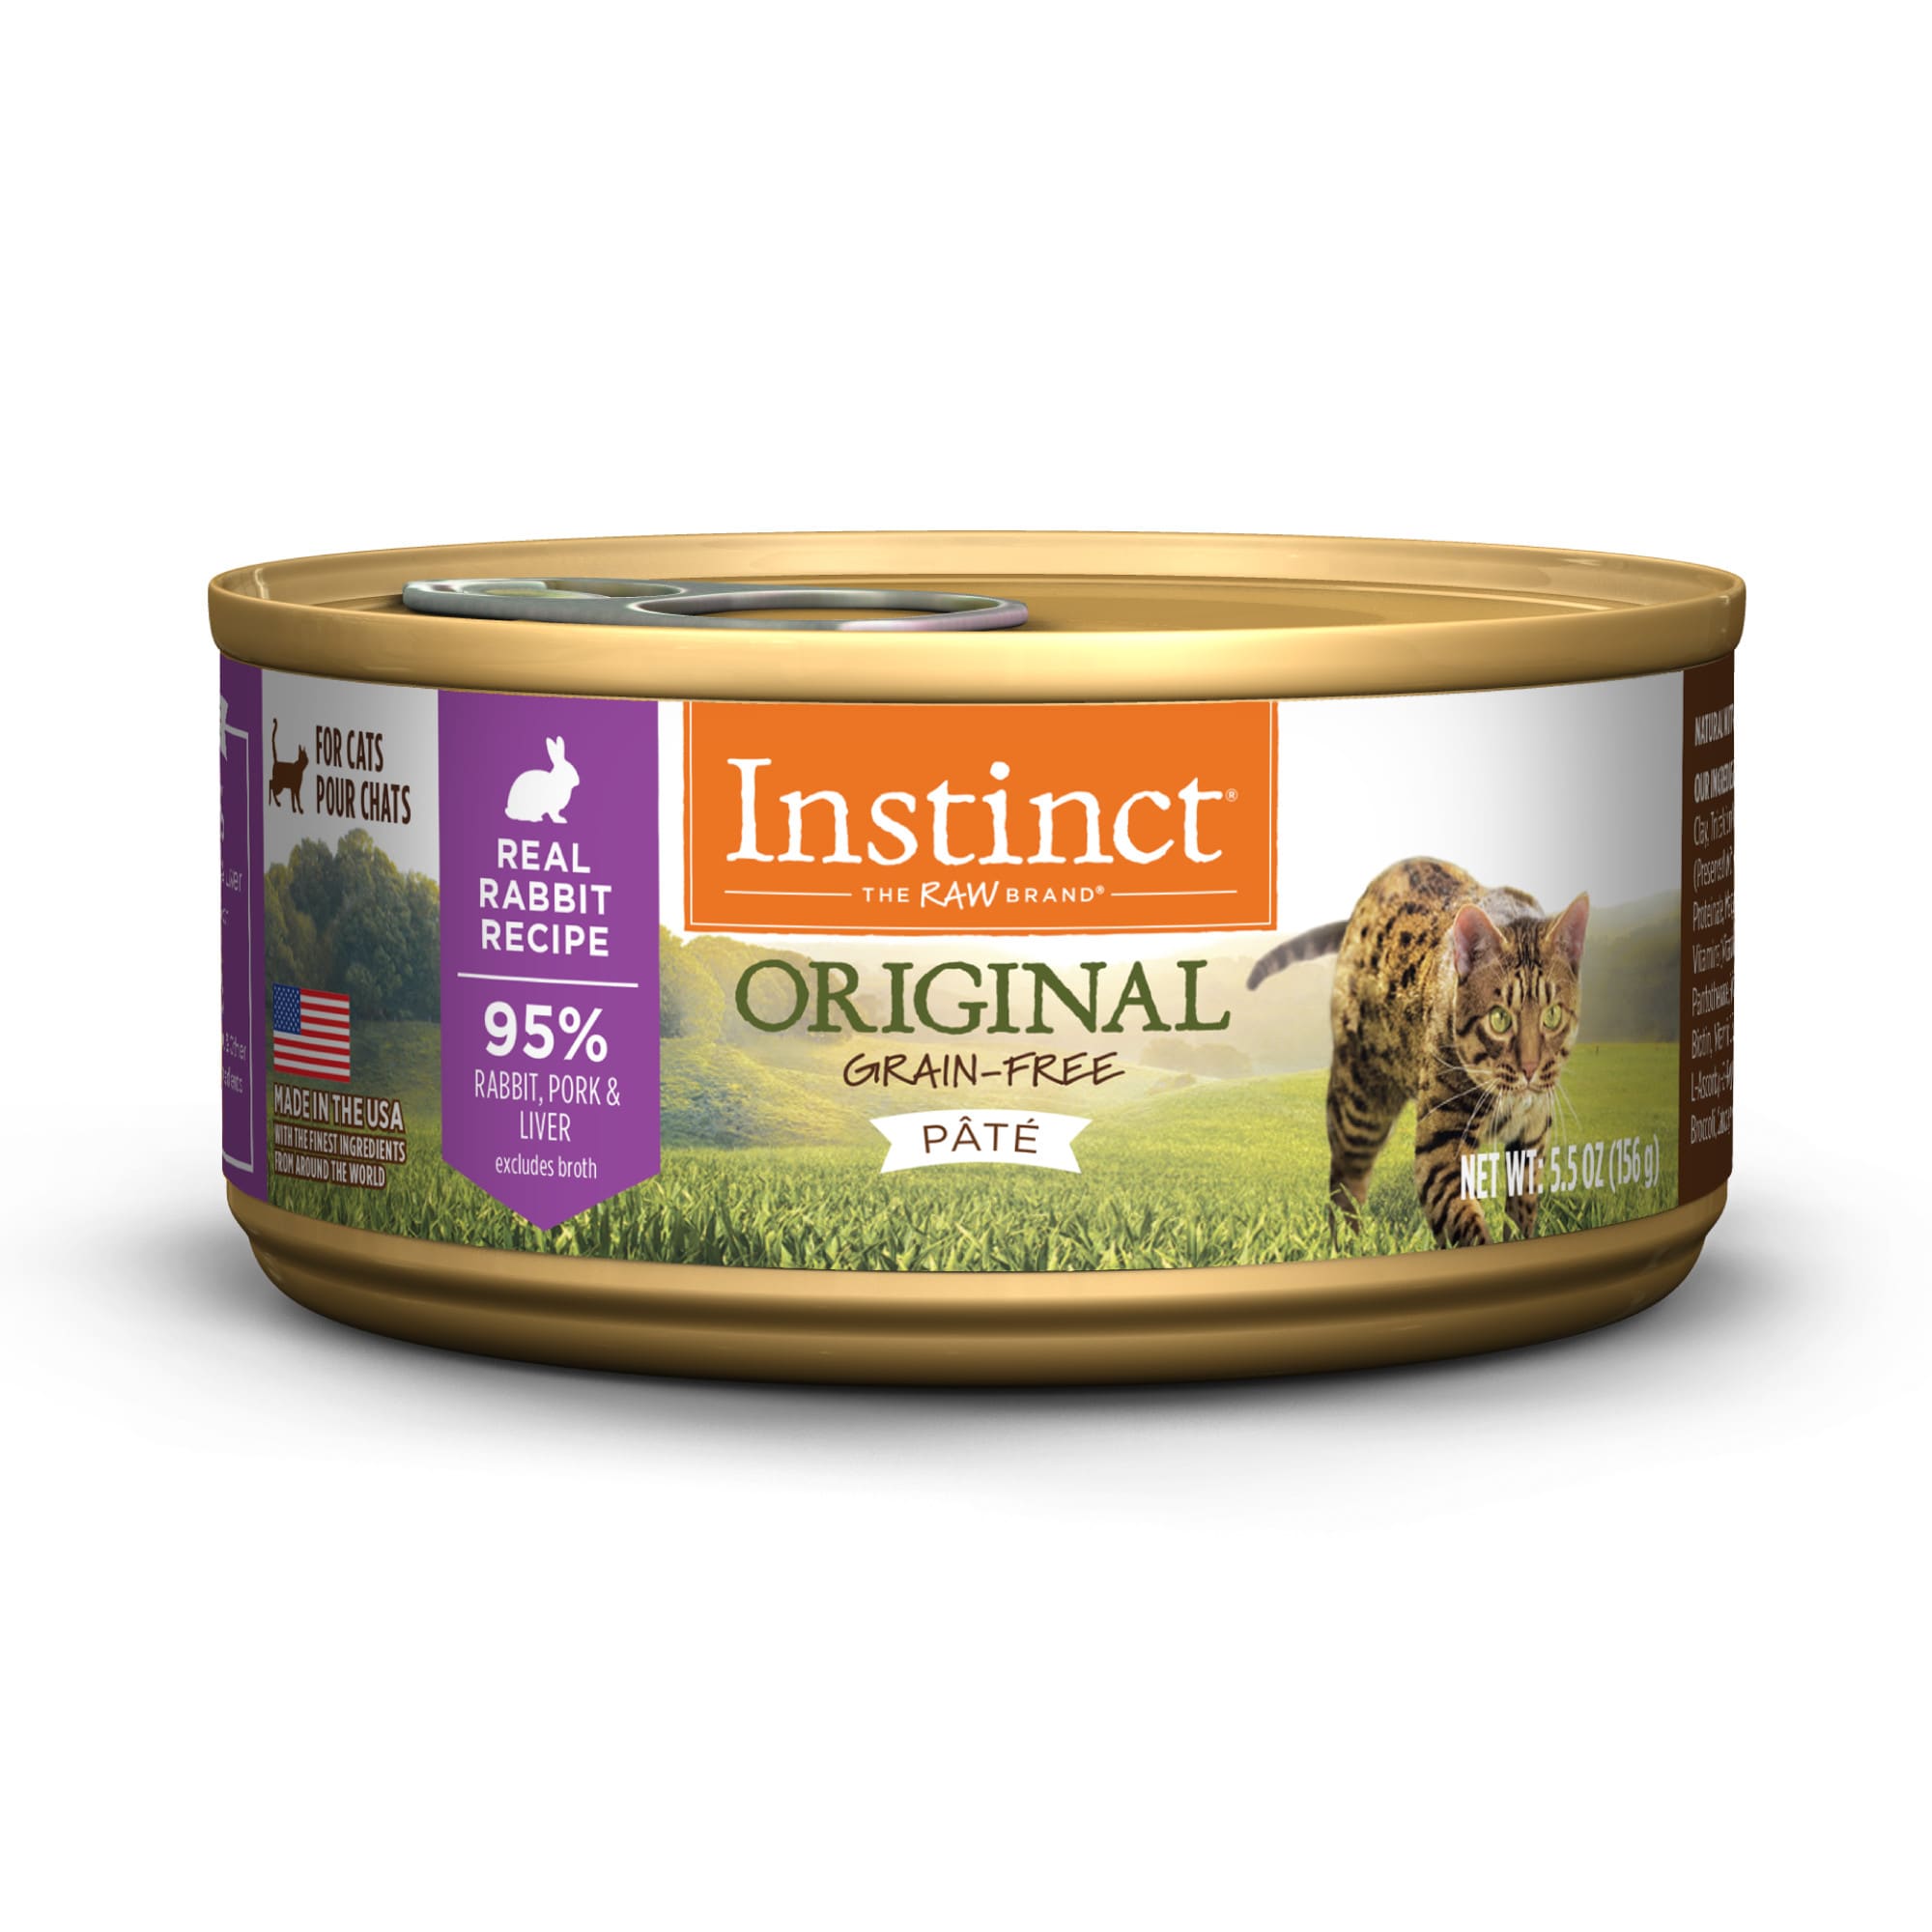 Rabbit Food for Cats